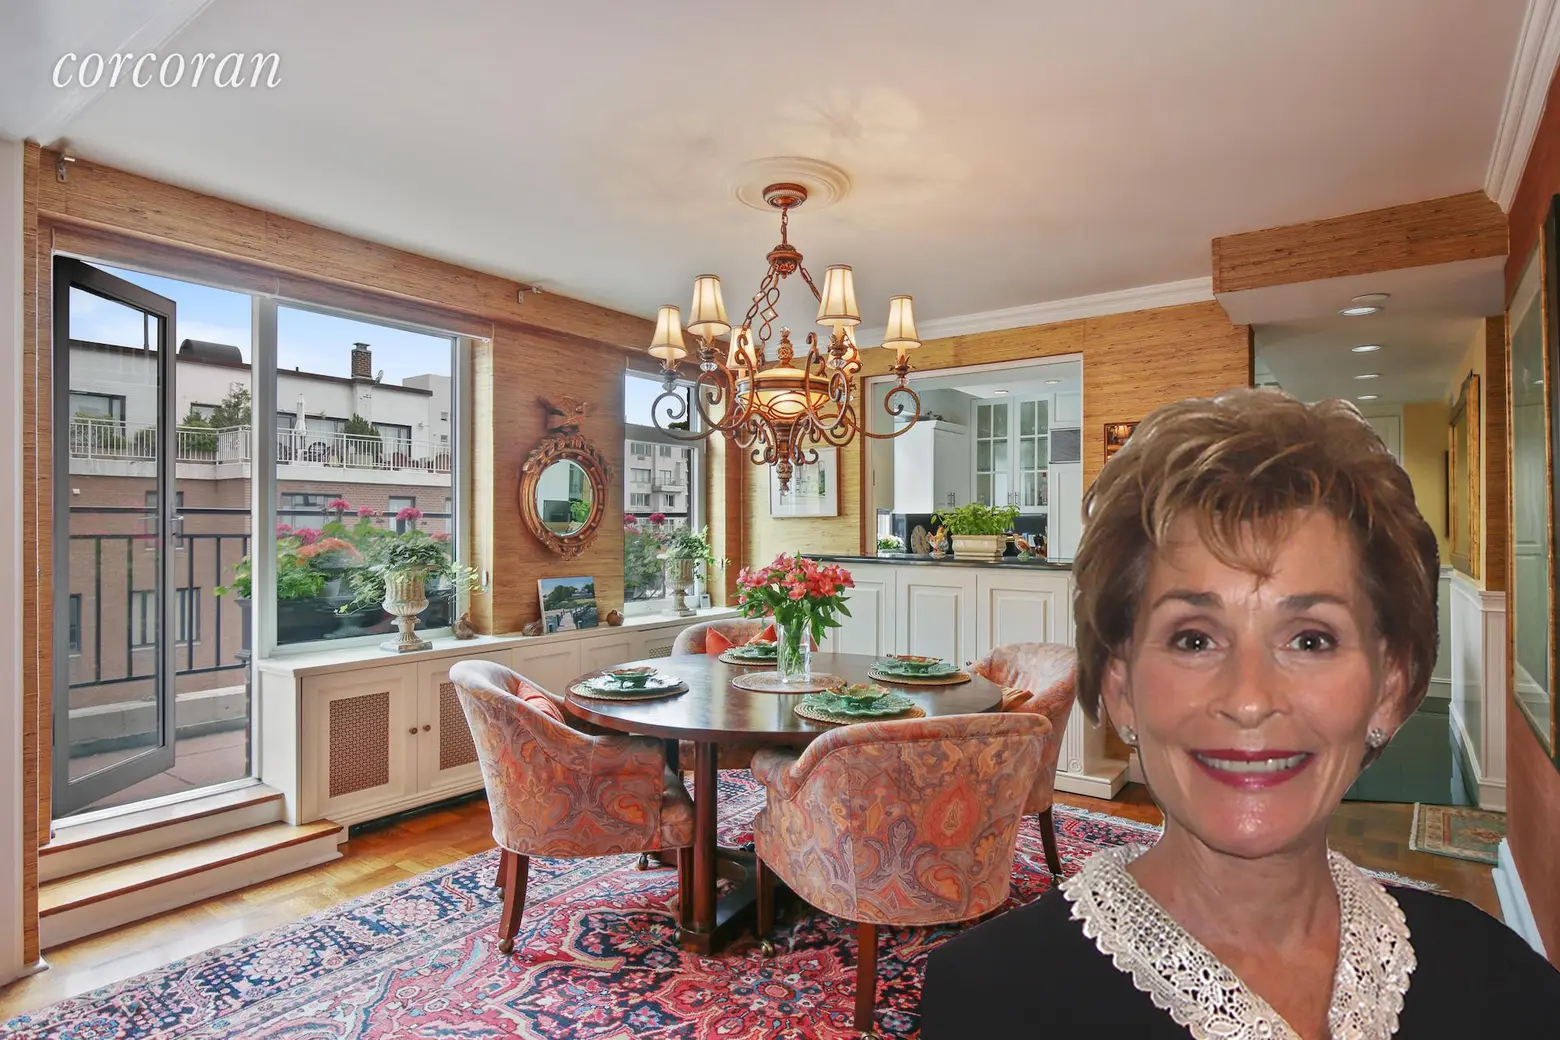 Judge Judy’s former Sutton Place penthouse with two terraces asks $3M